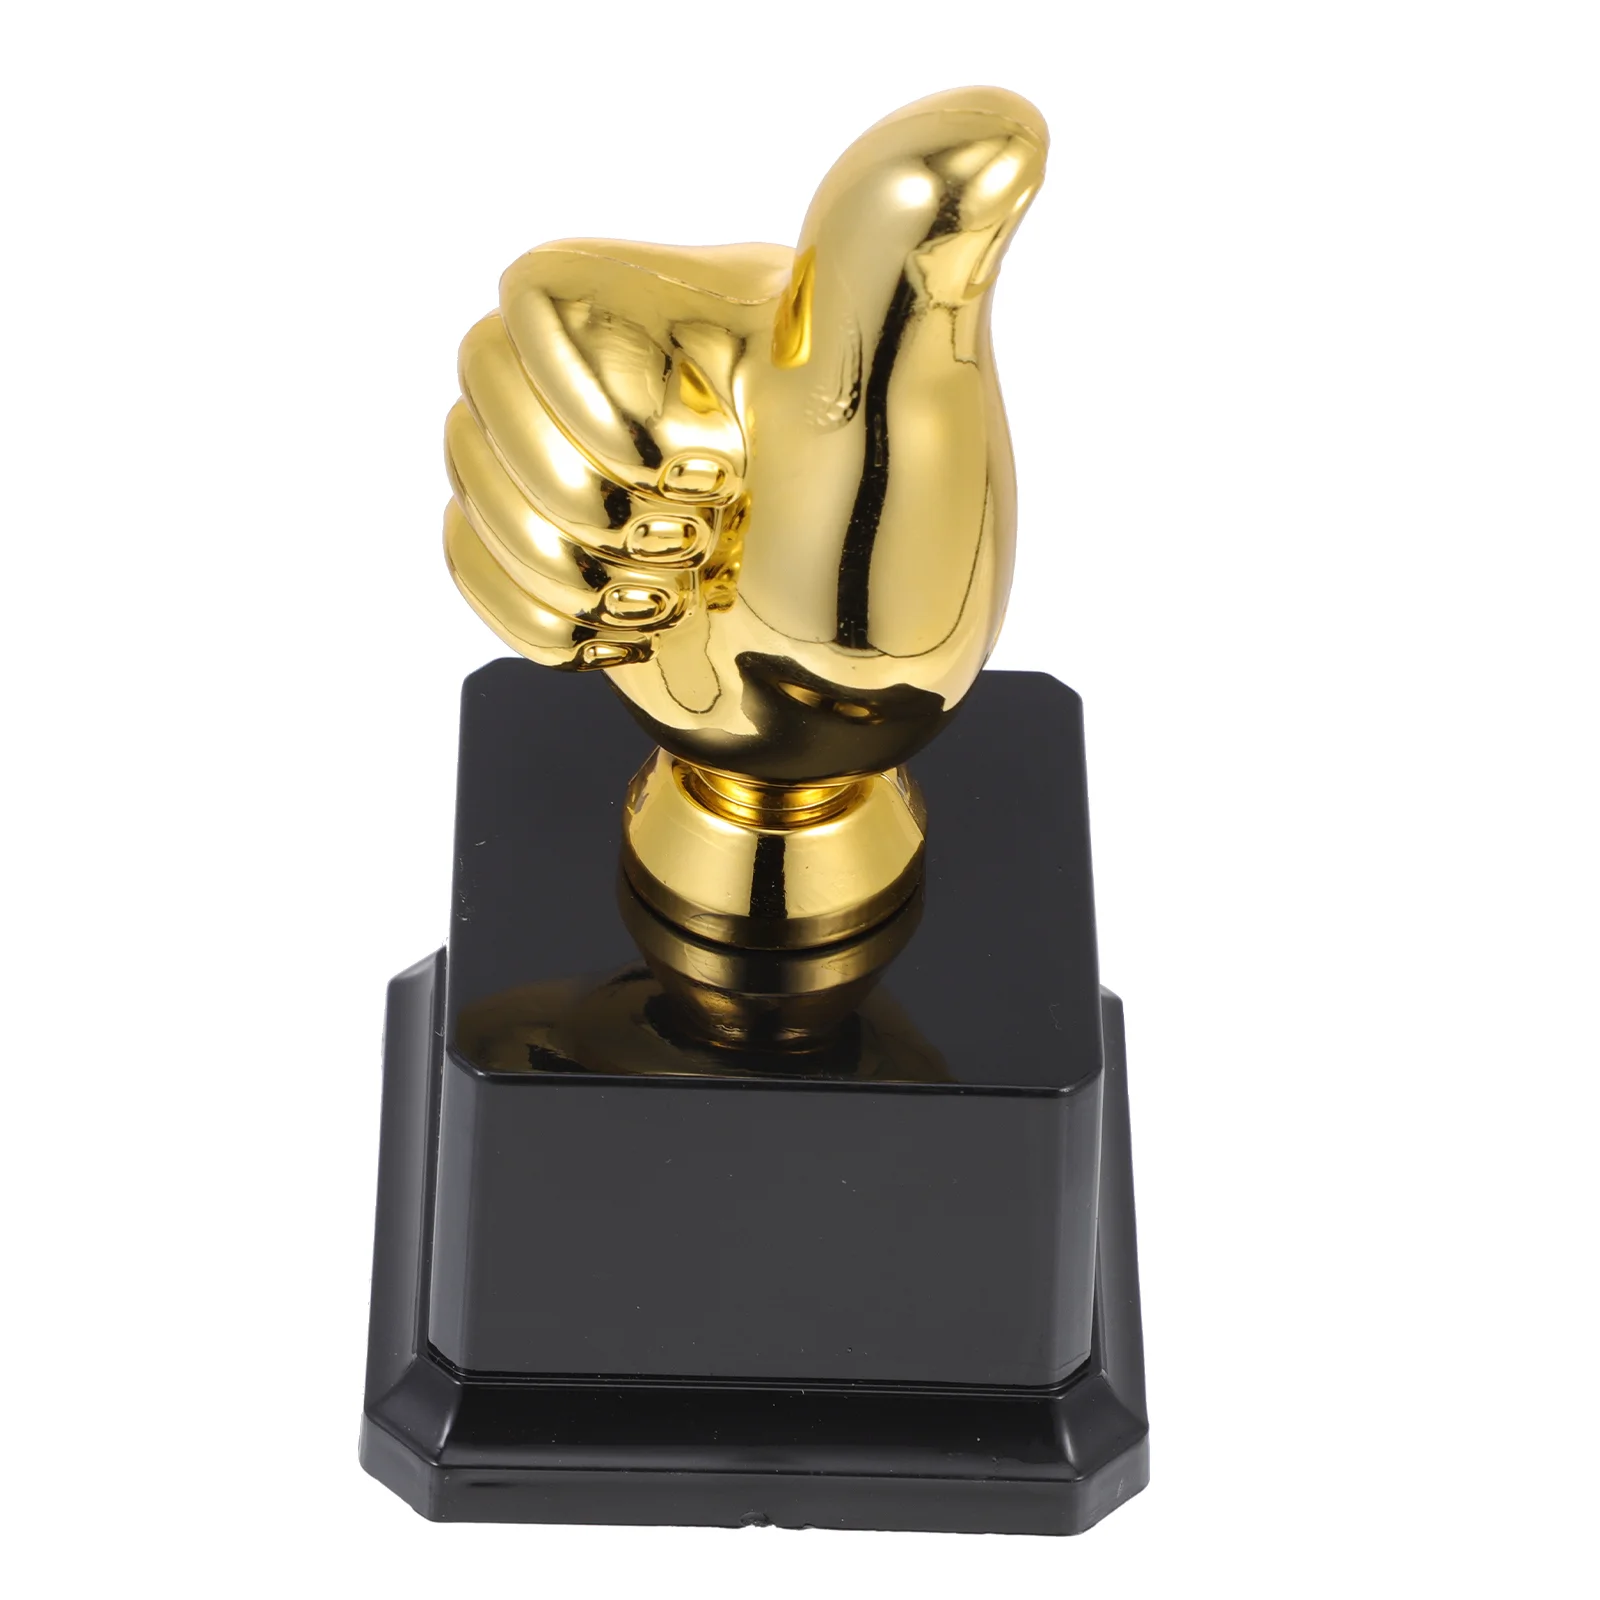 Trophy Awards Thumb Up Award Trophy Awards Plastic Golden Rewards Trophies Gold Awards Trophies Party Favors Sports Competition 10pcs toddler trophy model kids plastic trophy kids party awards plastic trophy toy star trophy